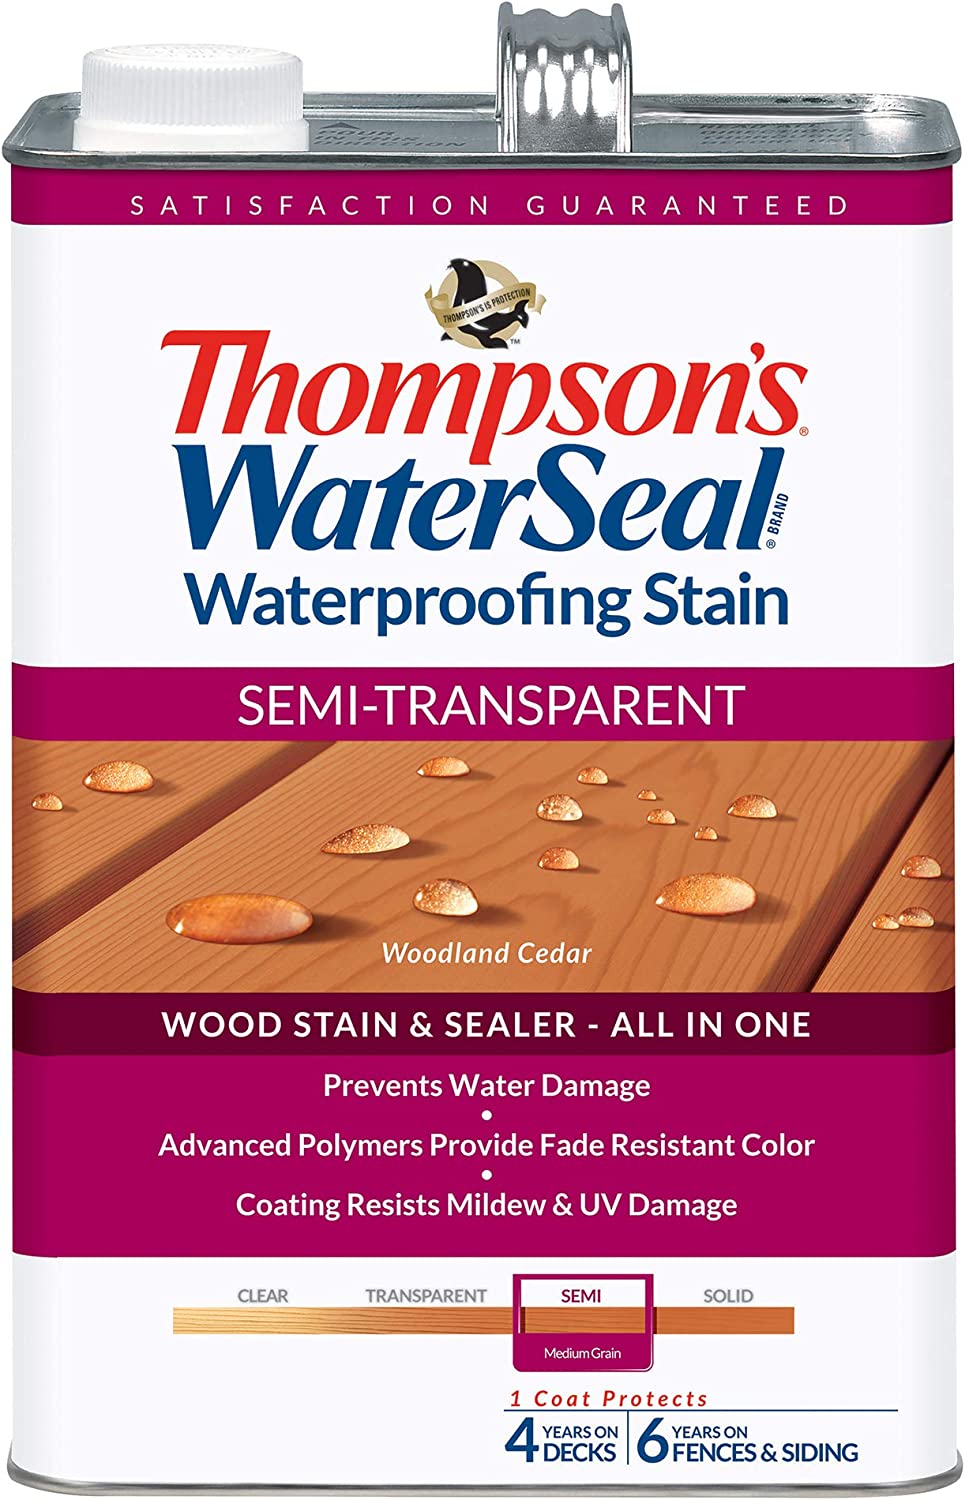 Thompsons Water-Seal Semi-Transparent Waterproofing Stain review